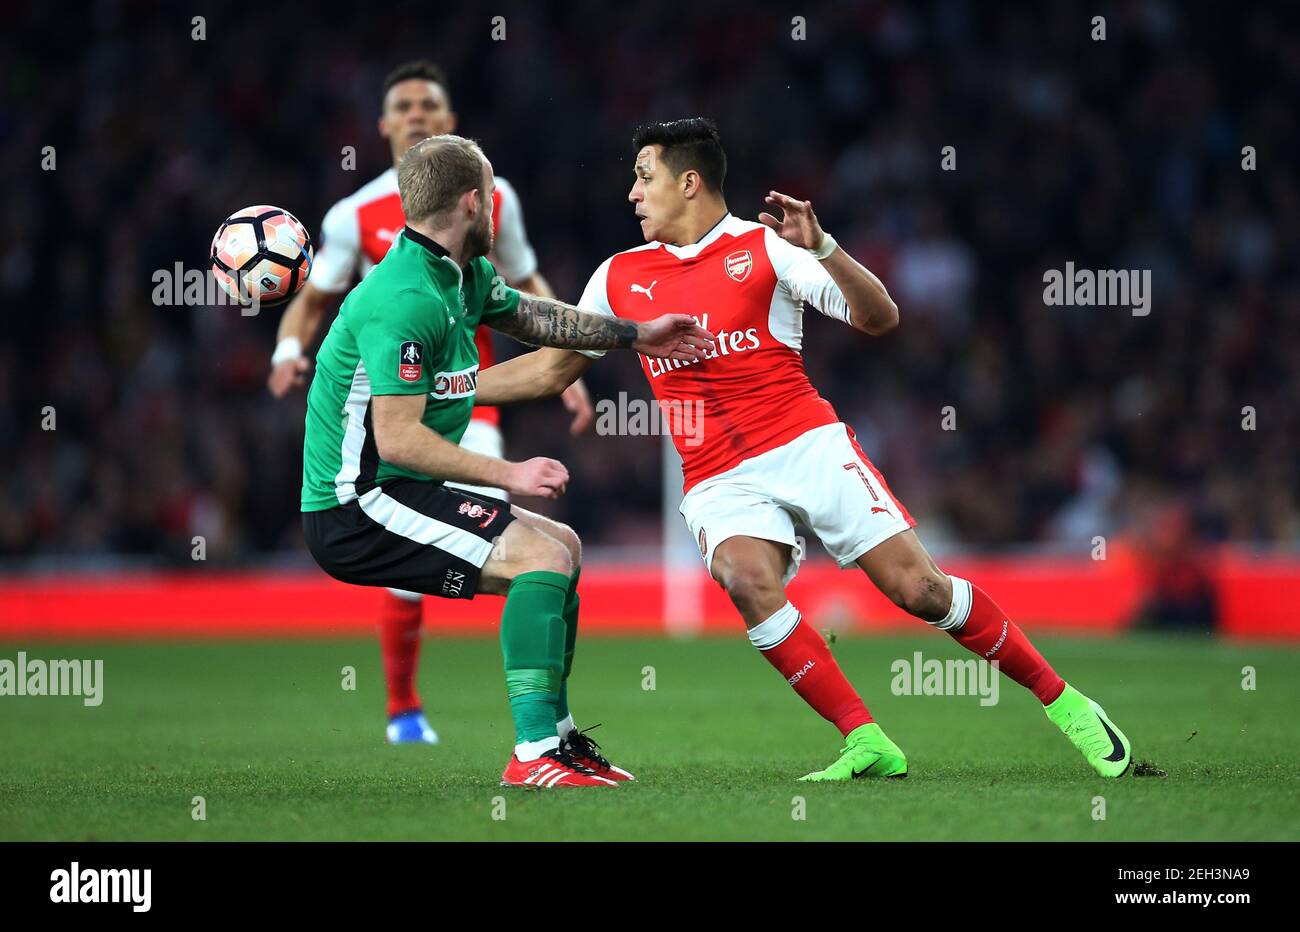 Britain Football Soccer - Arsenal v Lincoln City - FA Cup Quarter Final - The Emirates Stadium - 11/3/17 Arsenal's Alexis Sanchez in action Reuters / Paul Hackett Livepic EDITORIAL USE ONLY. No use with unauthorized audio, video, data, fixture lists, club/league logos or 'live' services. Online in-match use limited to 45 images, no video emulation. No use in betting, games or single club/league/player publications.  Please contact your account representative for further details. Stock Photo